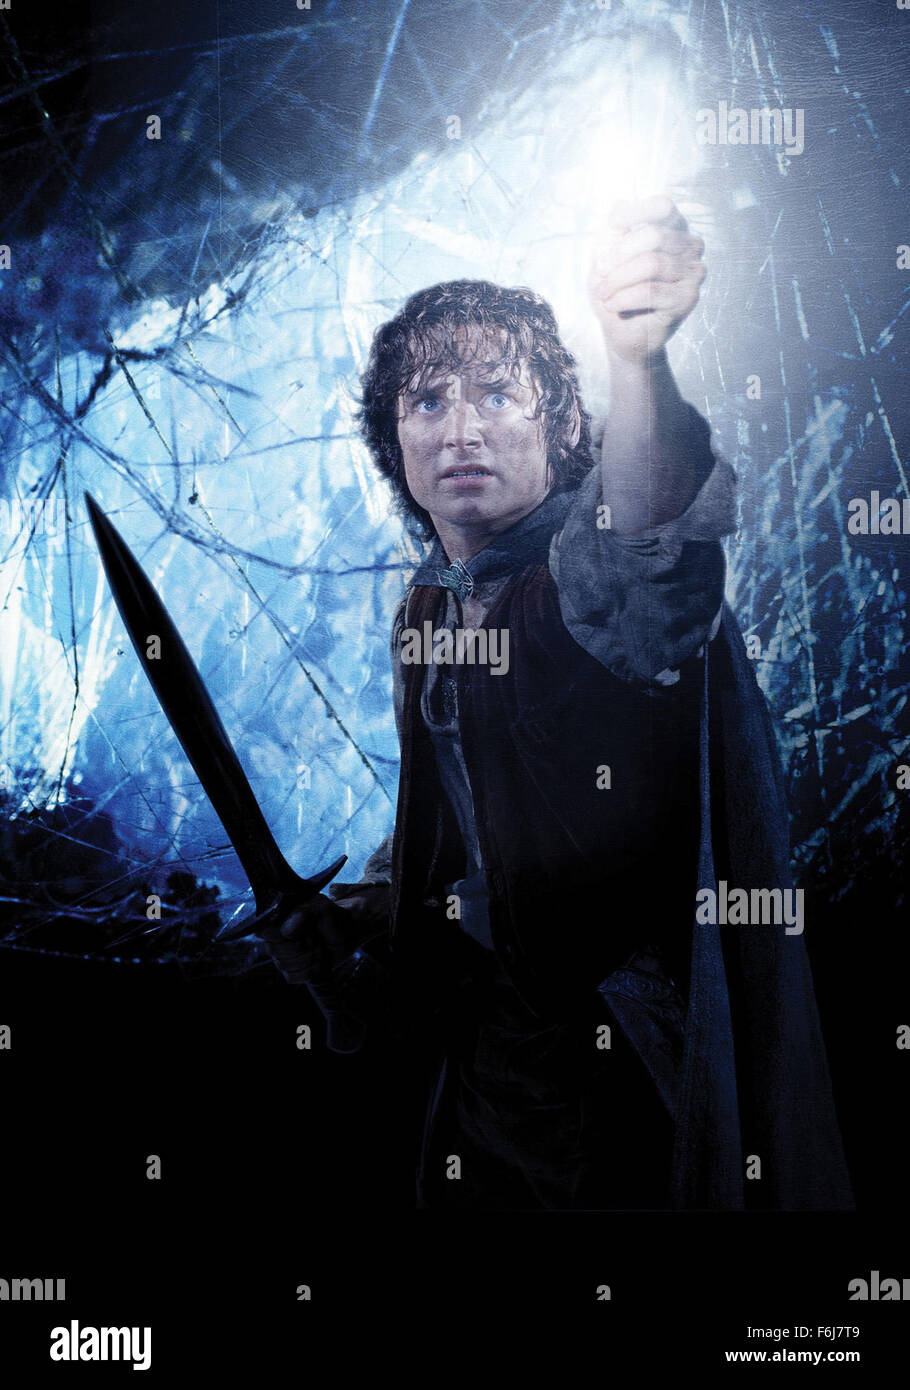 Feb 16, 2003; Hollywood, CA, USA; Poster image for director Peter Jackson's 'Lord of the Rings: Return of the King' starring  ELIJAH WOOD as Frodo. Stock Photo